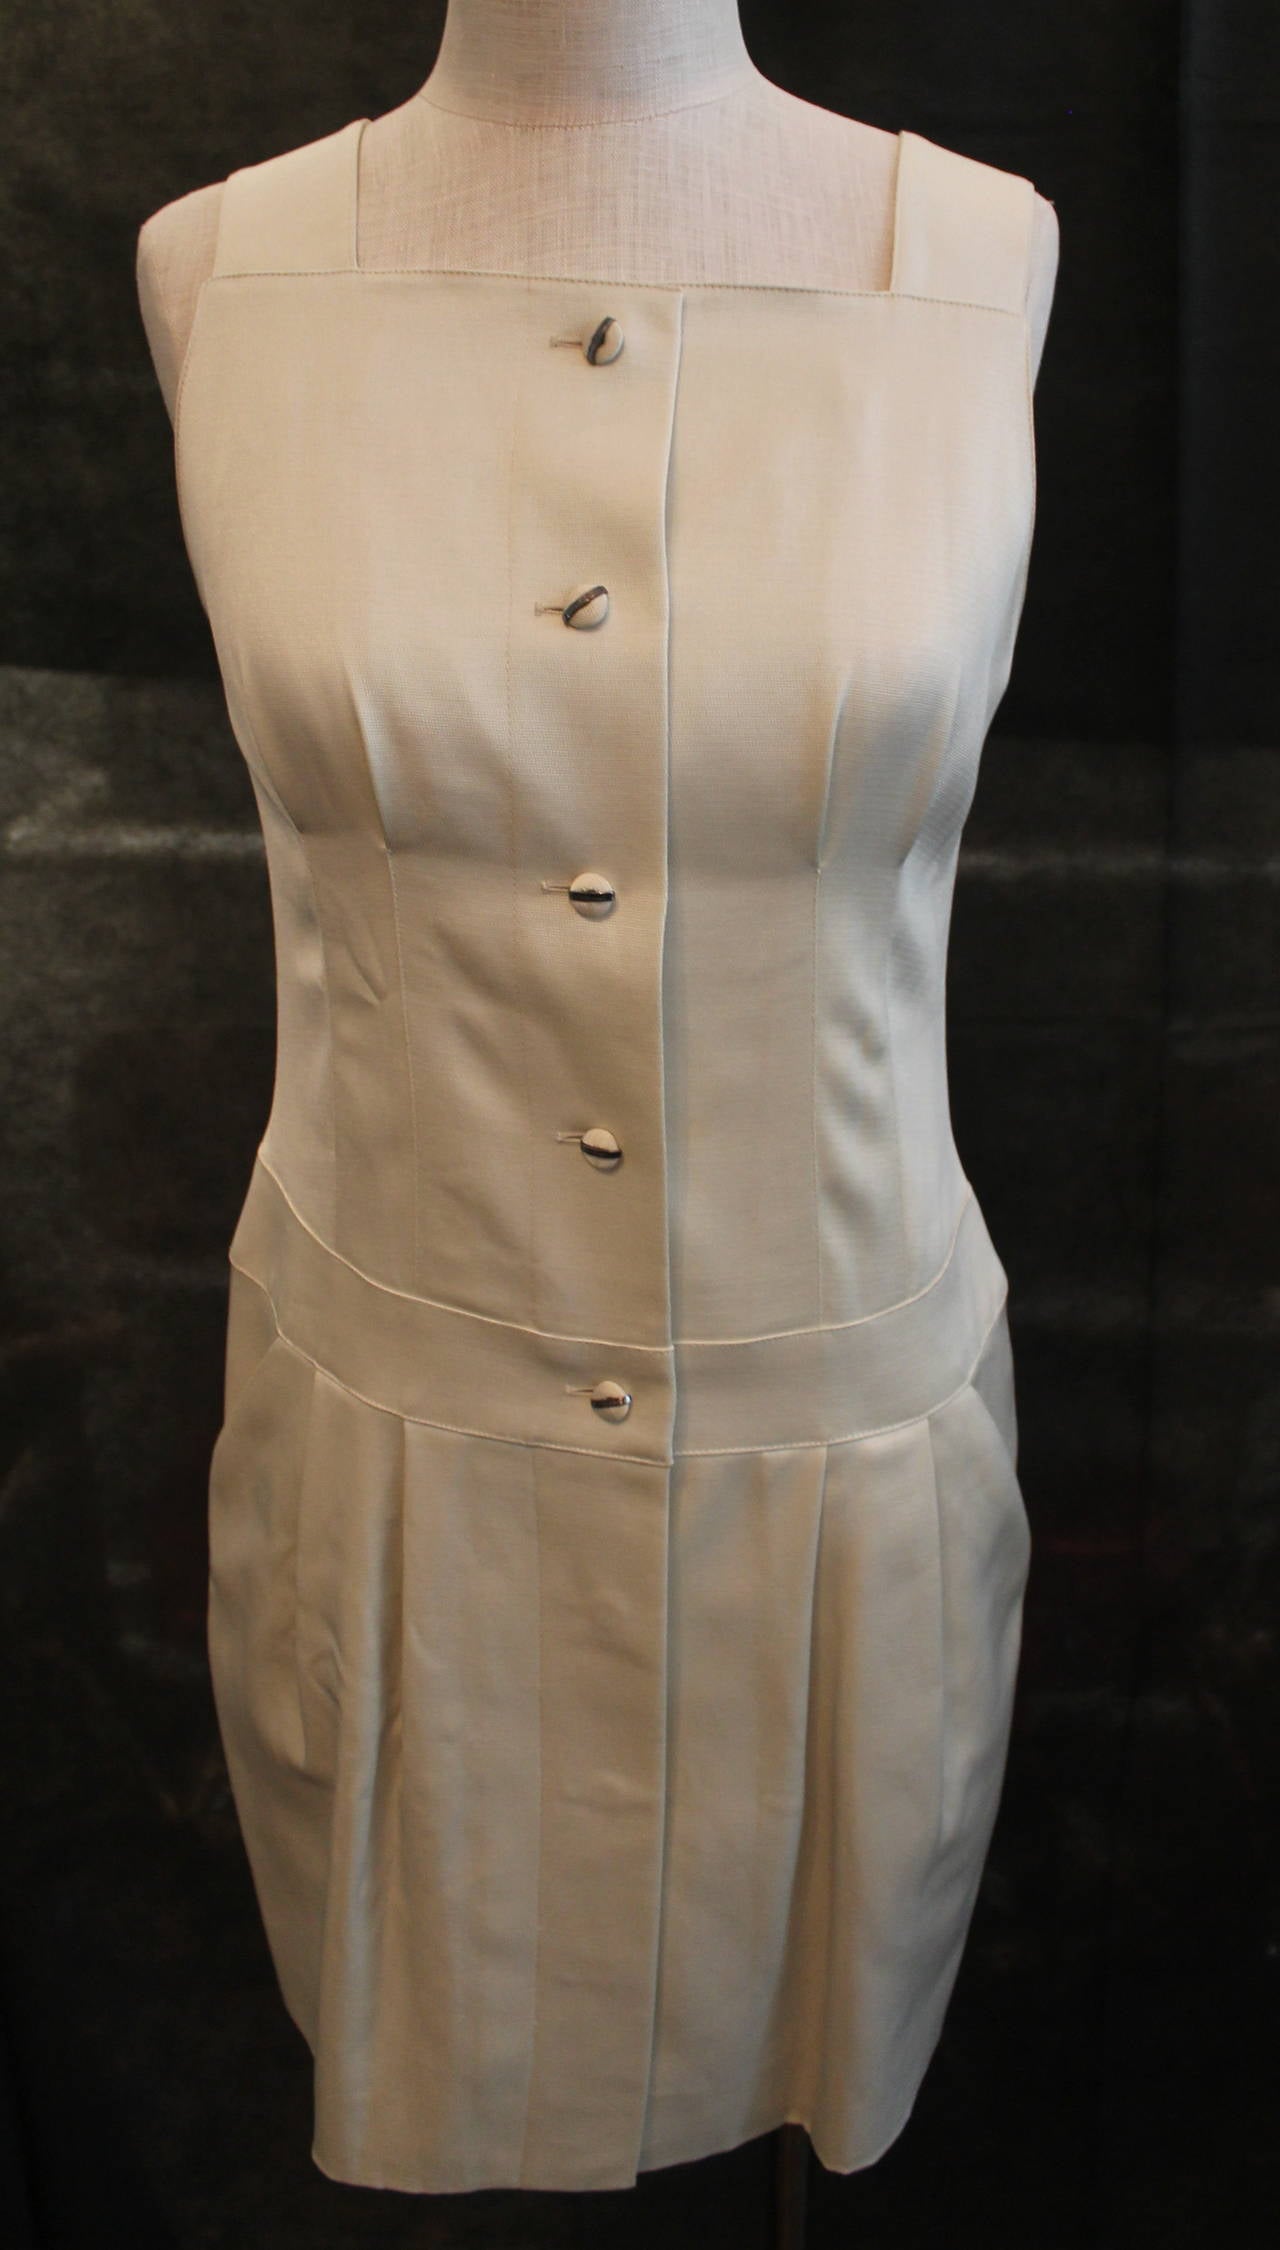 Karl Lagerfeld Vintage Ivory Dress & Jacket Set - 38. These pieces are in good condition.

Measurements:

Dress
Bust- 33